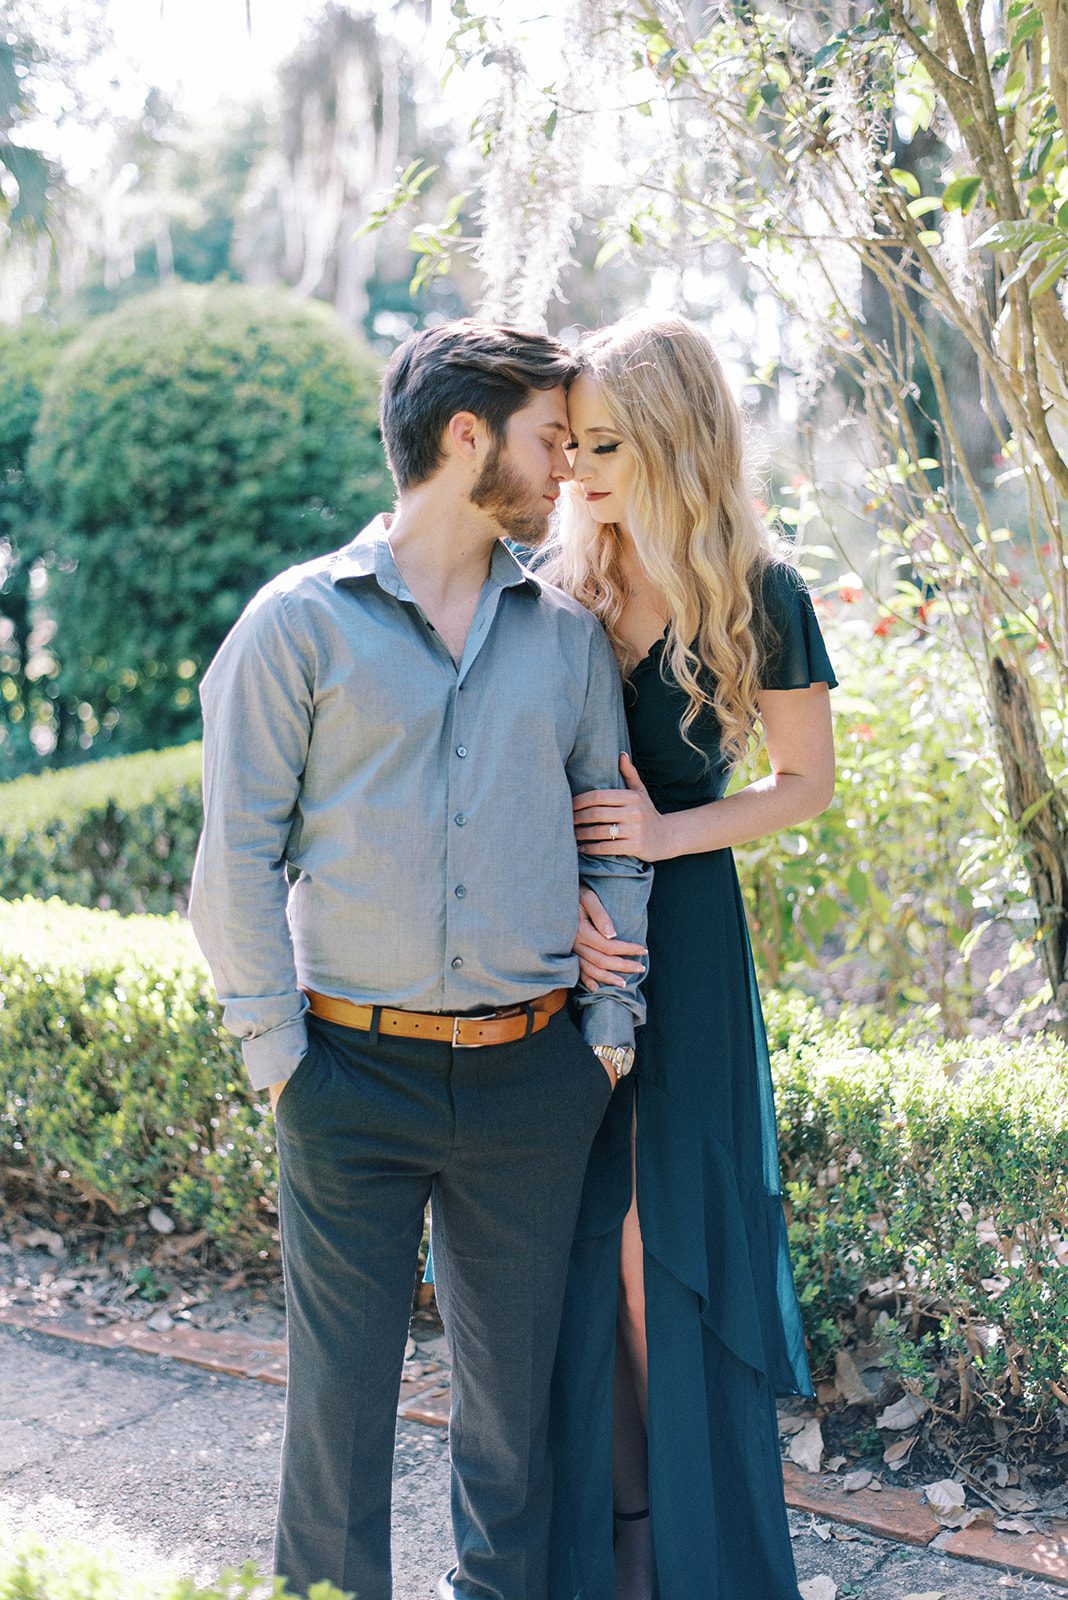 Bok Tower Gardens engagement photos in Tampa Florida with man and woman embracing each other while wearing blues and emerald greens